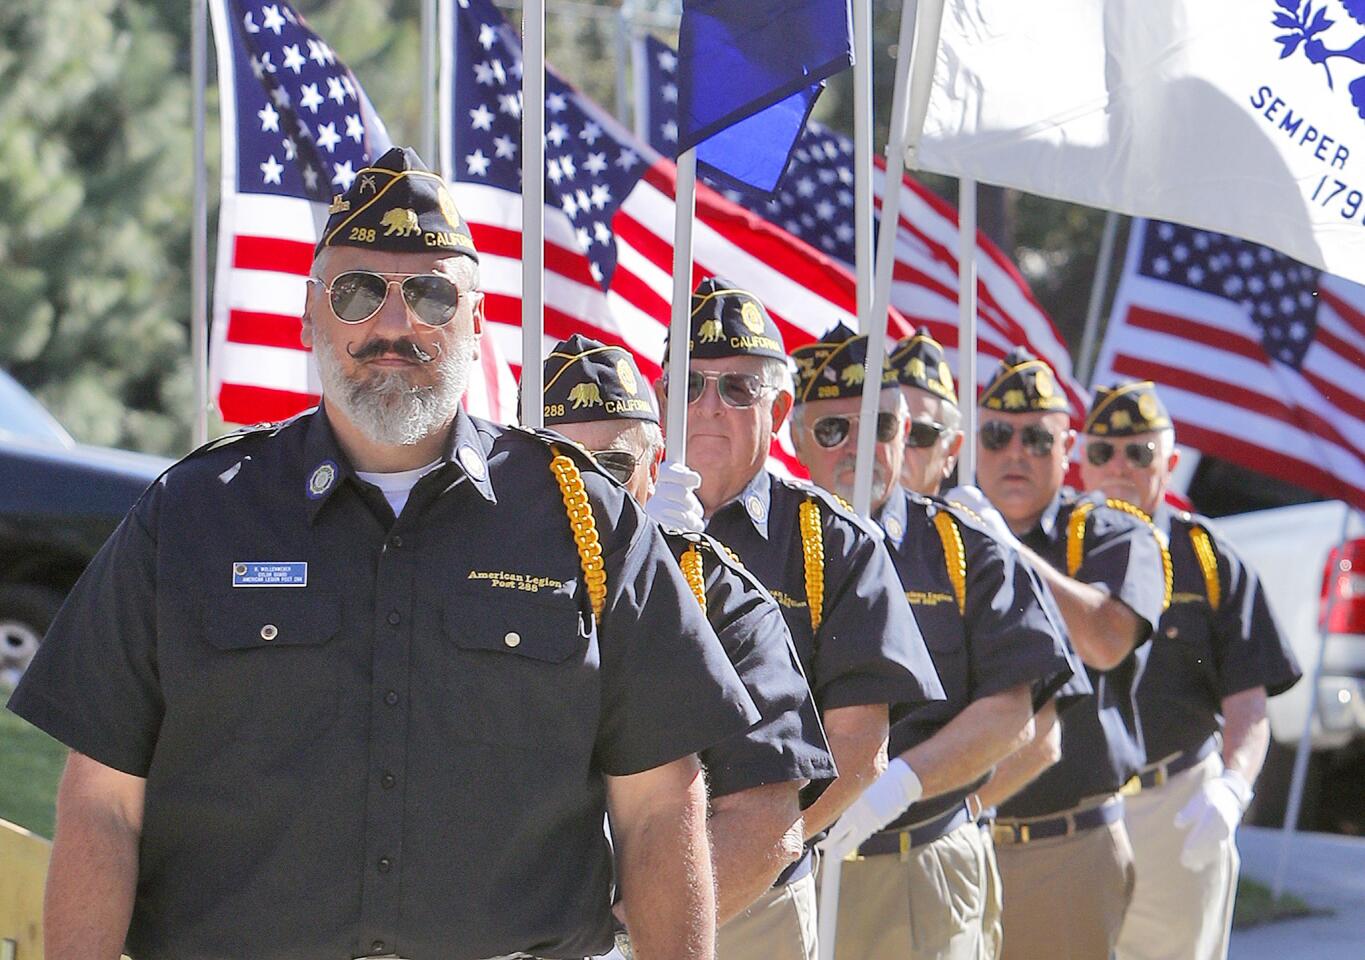 American Legionâ€™s Robert Wollenweber leads fellow members who bring flags of the branches of the military to center stage for a brief recognition at Two Strike Park in La Crescenta on Veteran's Day, Monday, November 12, 2018. United States Congressman Adam Schiff briefly spoke, and the Armistice was recognized, as well as each branch of the military. A U.S. Flag was also retired.